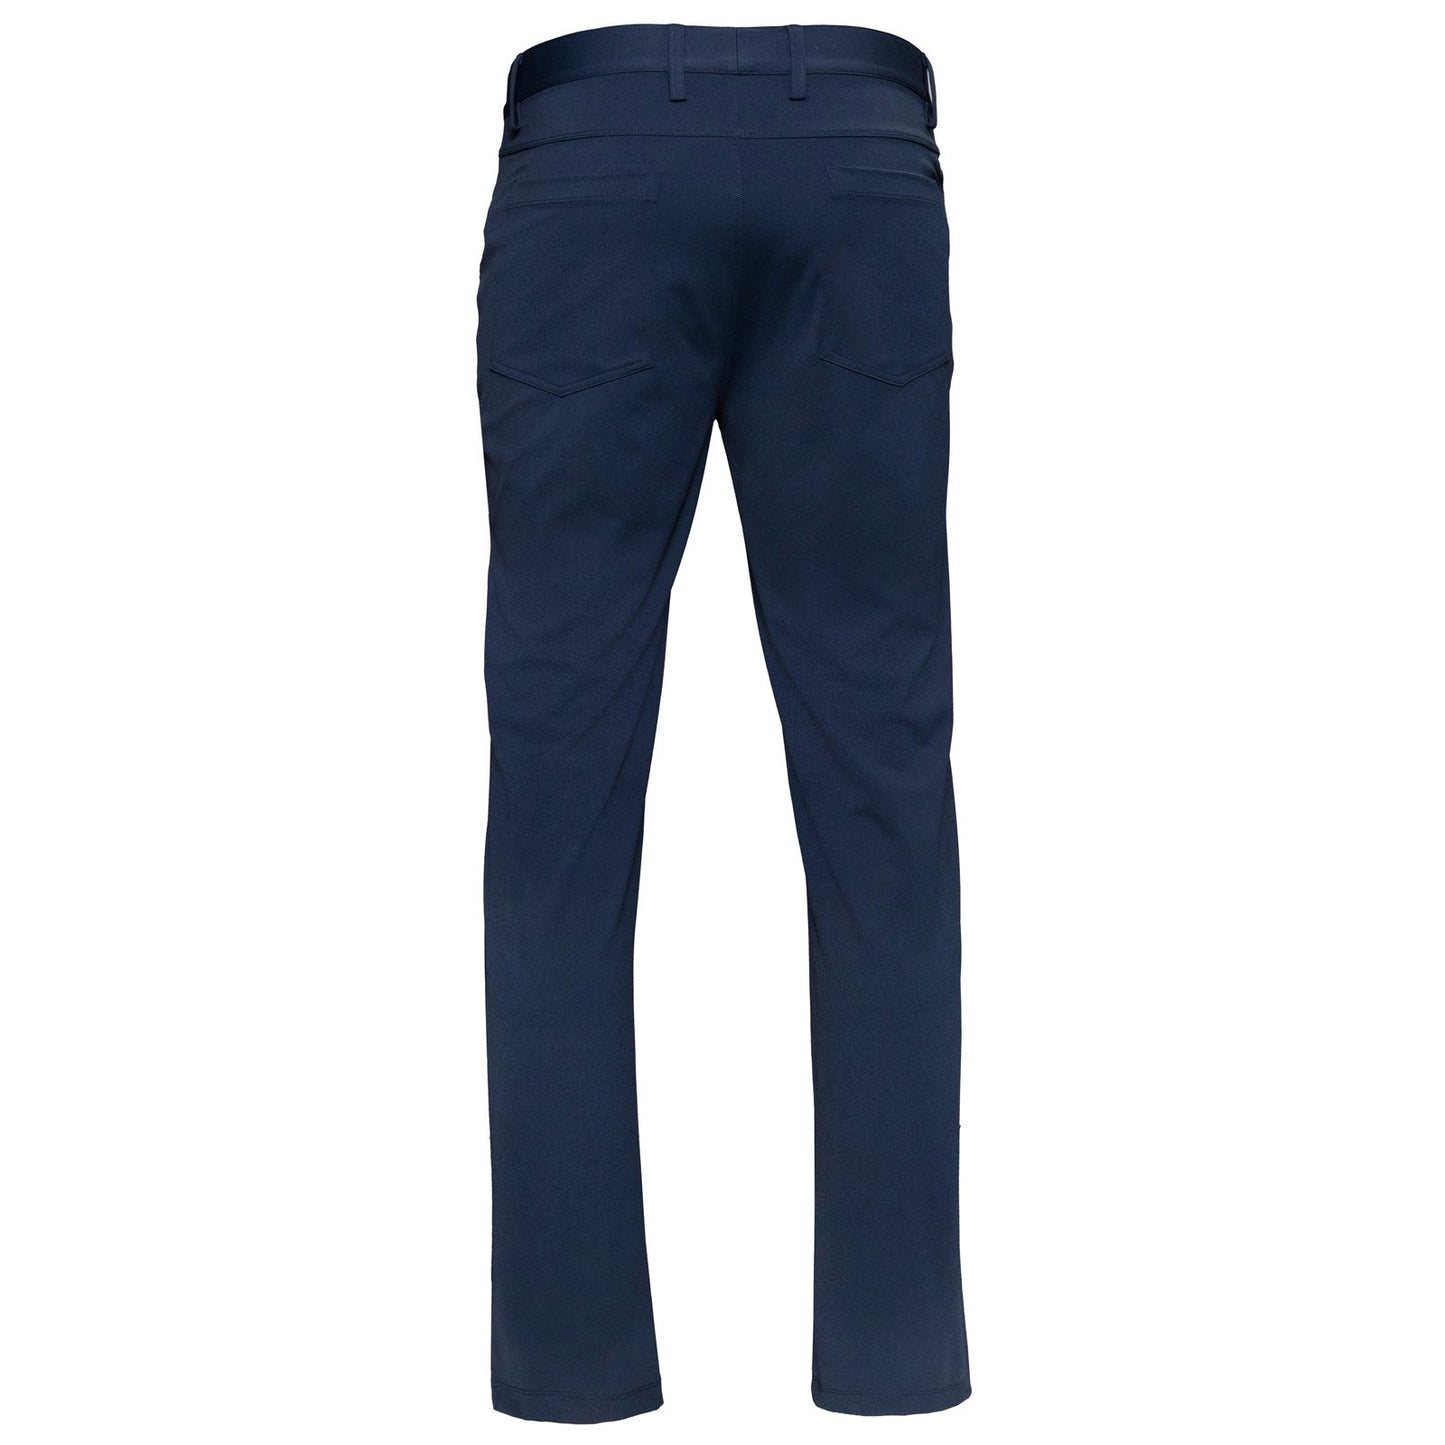 All Time Pant - Blue Depths